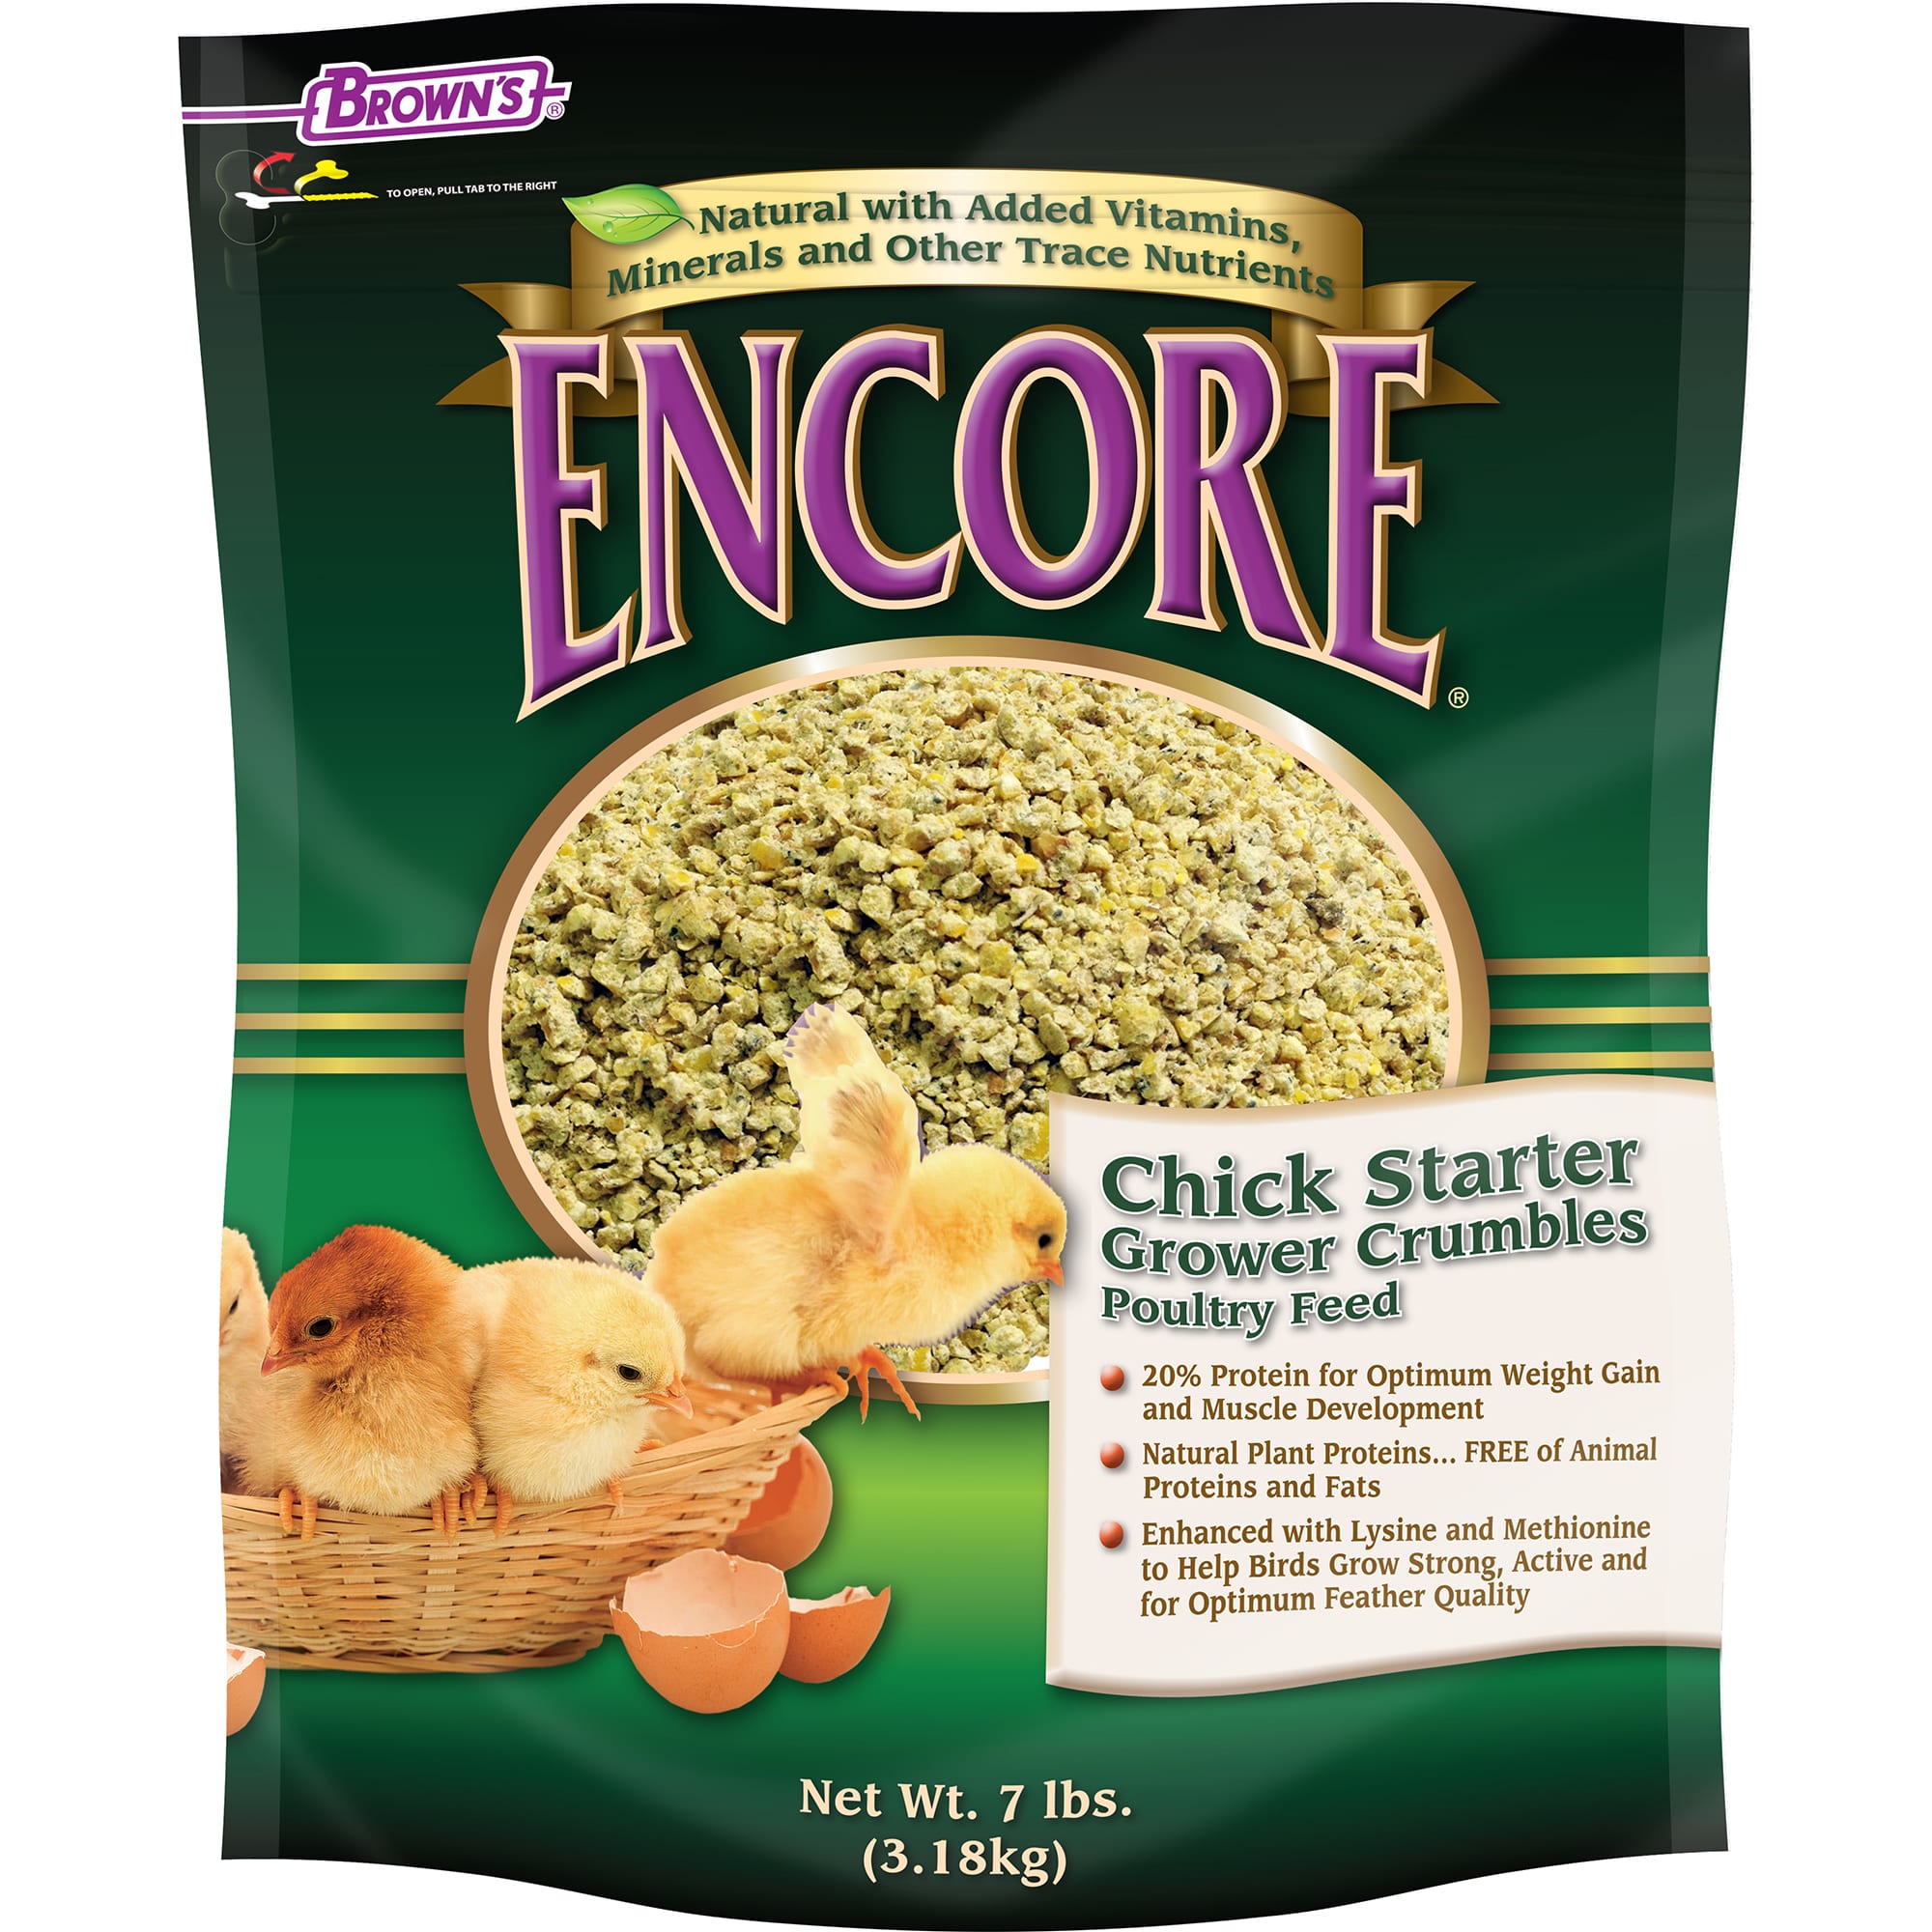 FM Browns Encore Natural Chick Starter Grower Crumbles Poultry Feed, 7 lbs.